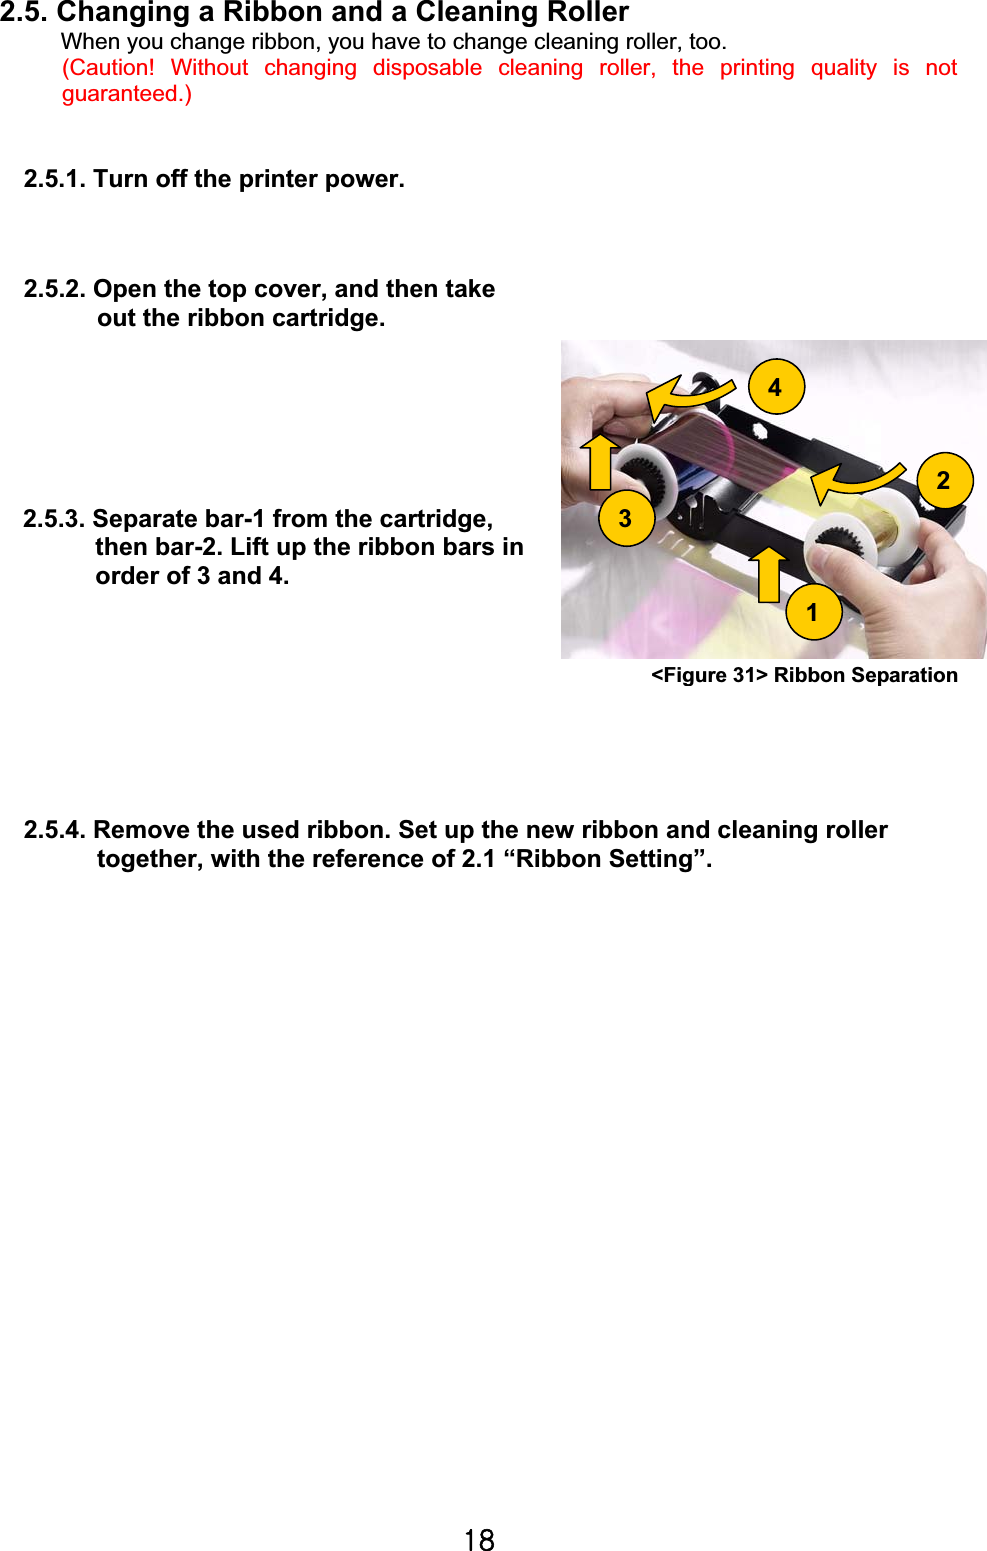 X_G2.5. Changing a Ribbon and a Cleaning RollerWhen you change ribbon, you have to change cleaning roller, too. (Caution! Without changing disposable cleaning roller, the printing quality is not guaranteed.)2.5.1. Turn off the printer power. 2.5.2. Open the top cover, and then take   out the ribbon cartridge.   2.5.3. Separate bar-1 from the cartridge,   then bar-2. Lift up the ribbon bars in   order of 3 and 4. 2.5.4. Remove the used ribbon. Set up the new ribbon and cleaning roller   together, with the reference of 2.1 “Ribbon Setting”. 432&lt;Figure 31&gt; Ribbon Separation1